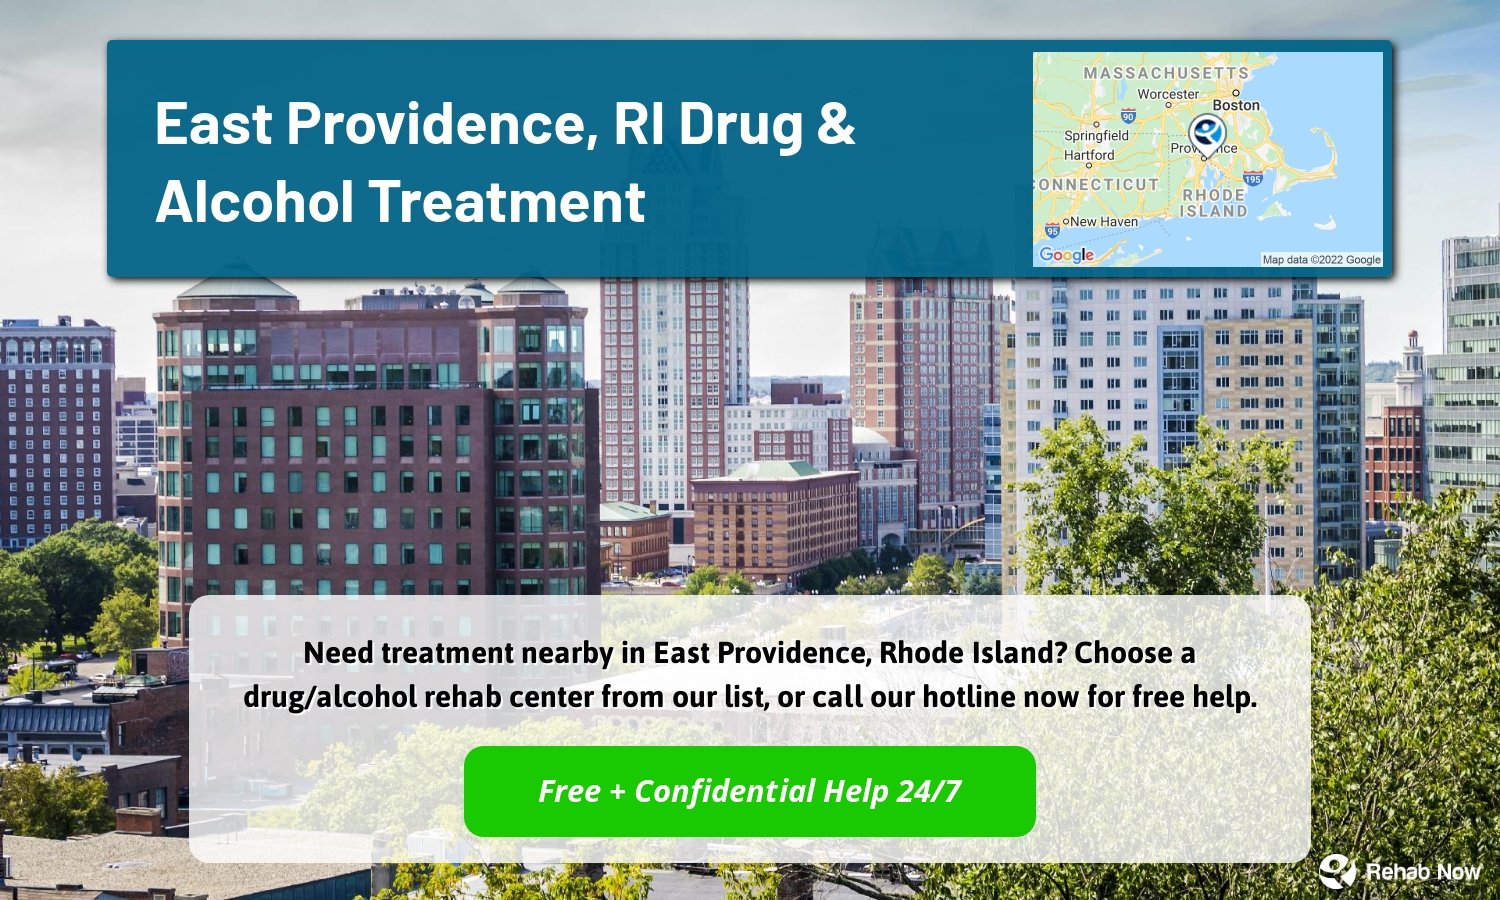 Need treatment nearby in East Providence, Rhode Island? Choose a drug/alcohol rehab center from our list, or call our hotline now for free help.